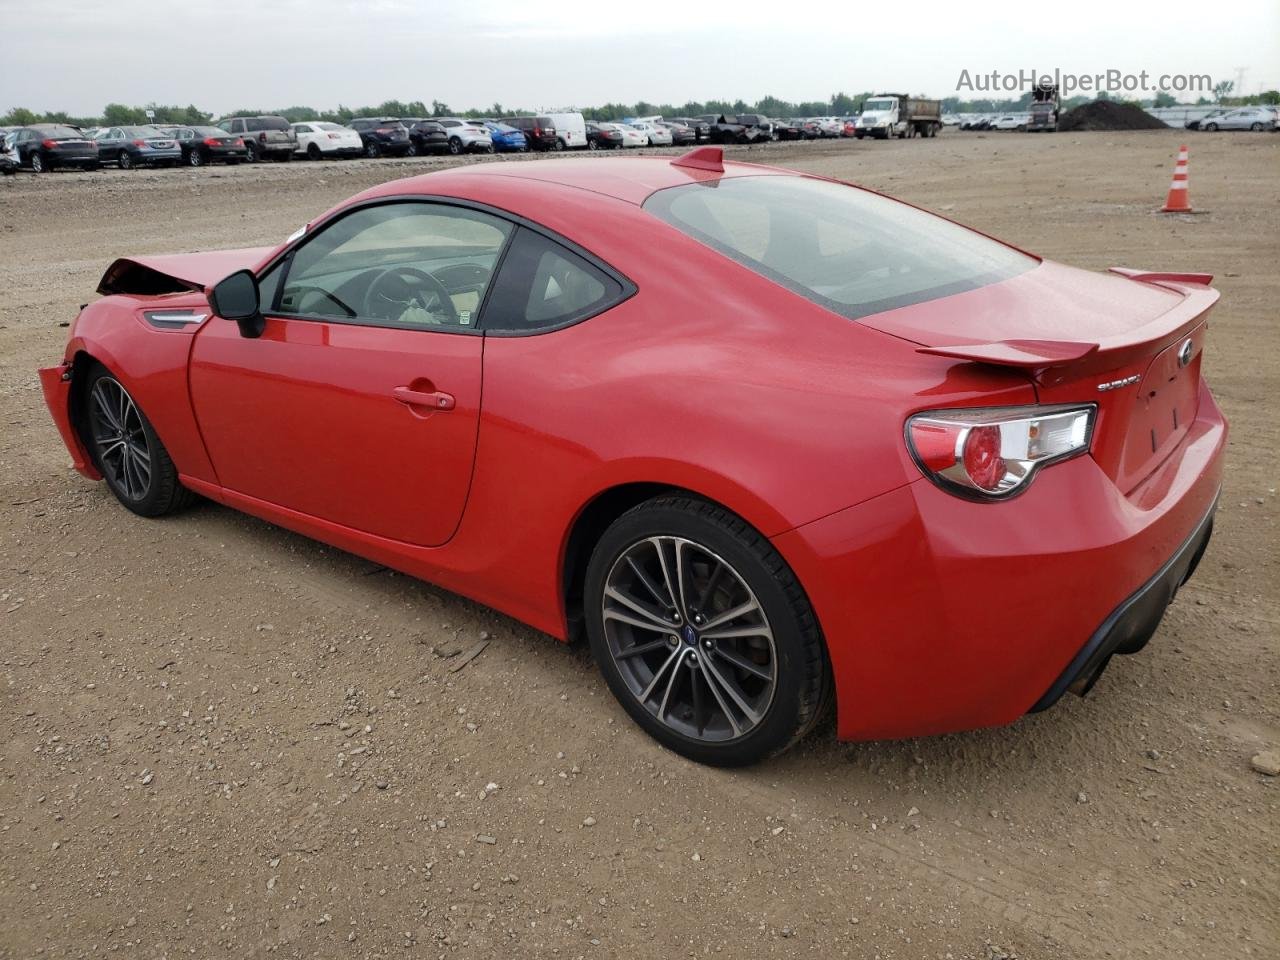 2014 Subaru Brz 2.0 Limited Red vin: JF1ZCAC18E9601190